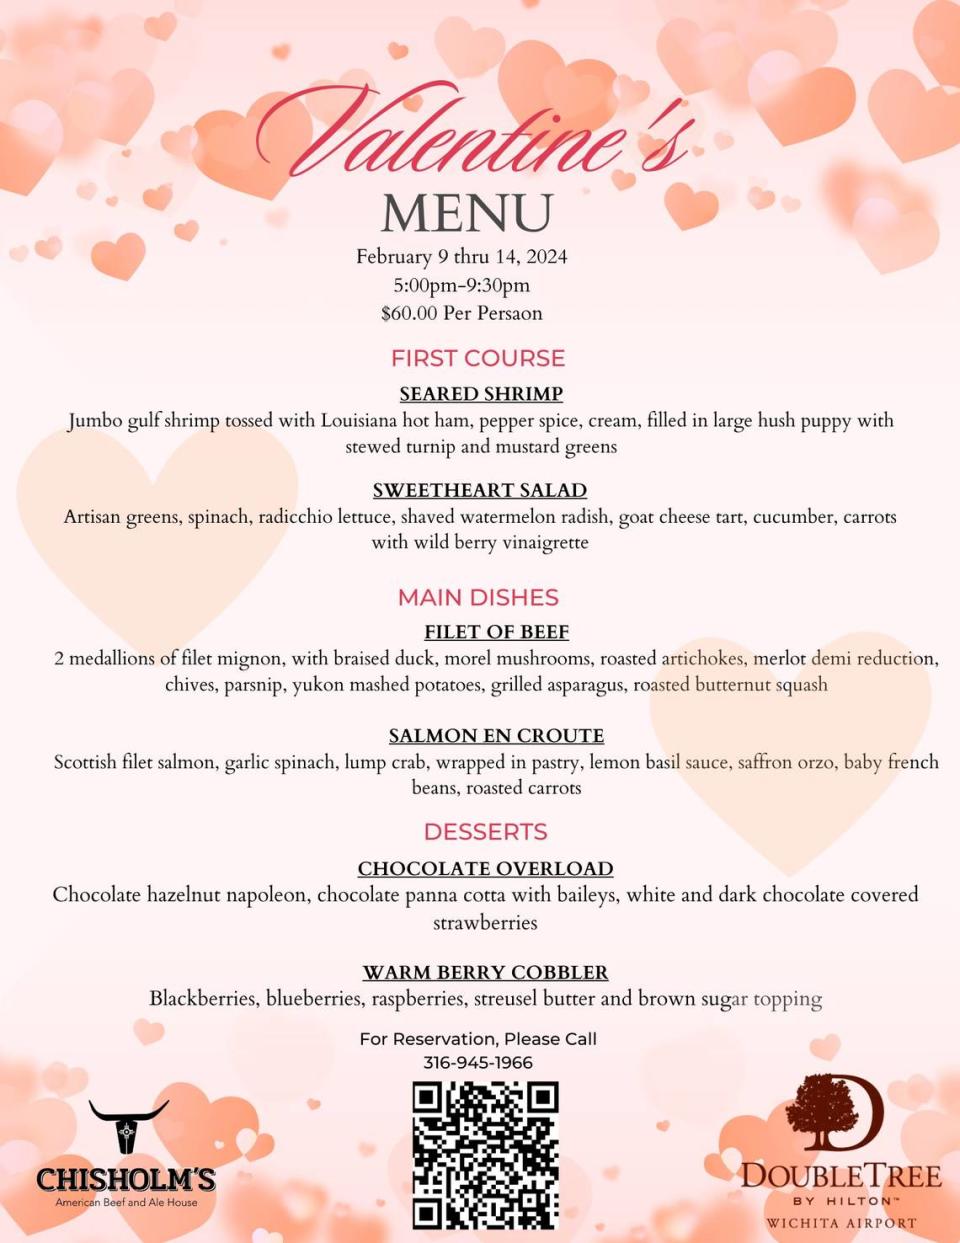 The 2024 Valentine’s Day menu being offered at Wichita’s Chisholm’s American Beef & Ale House